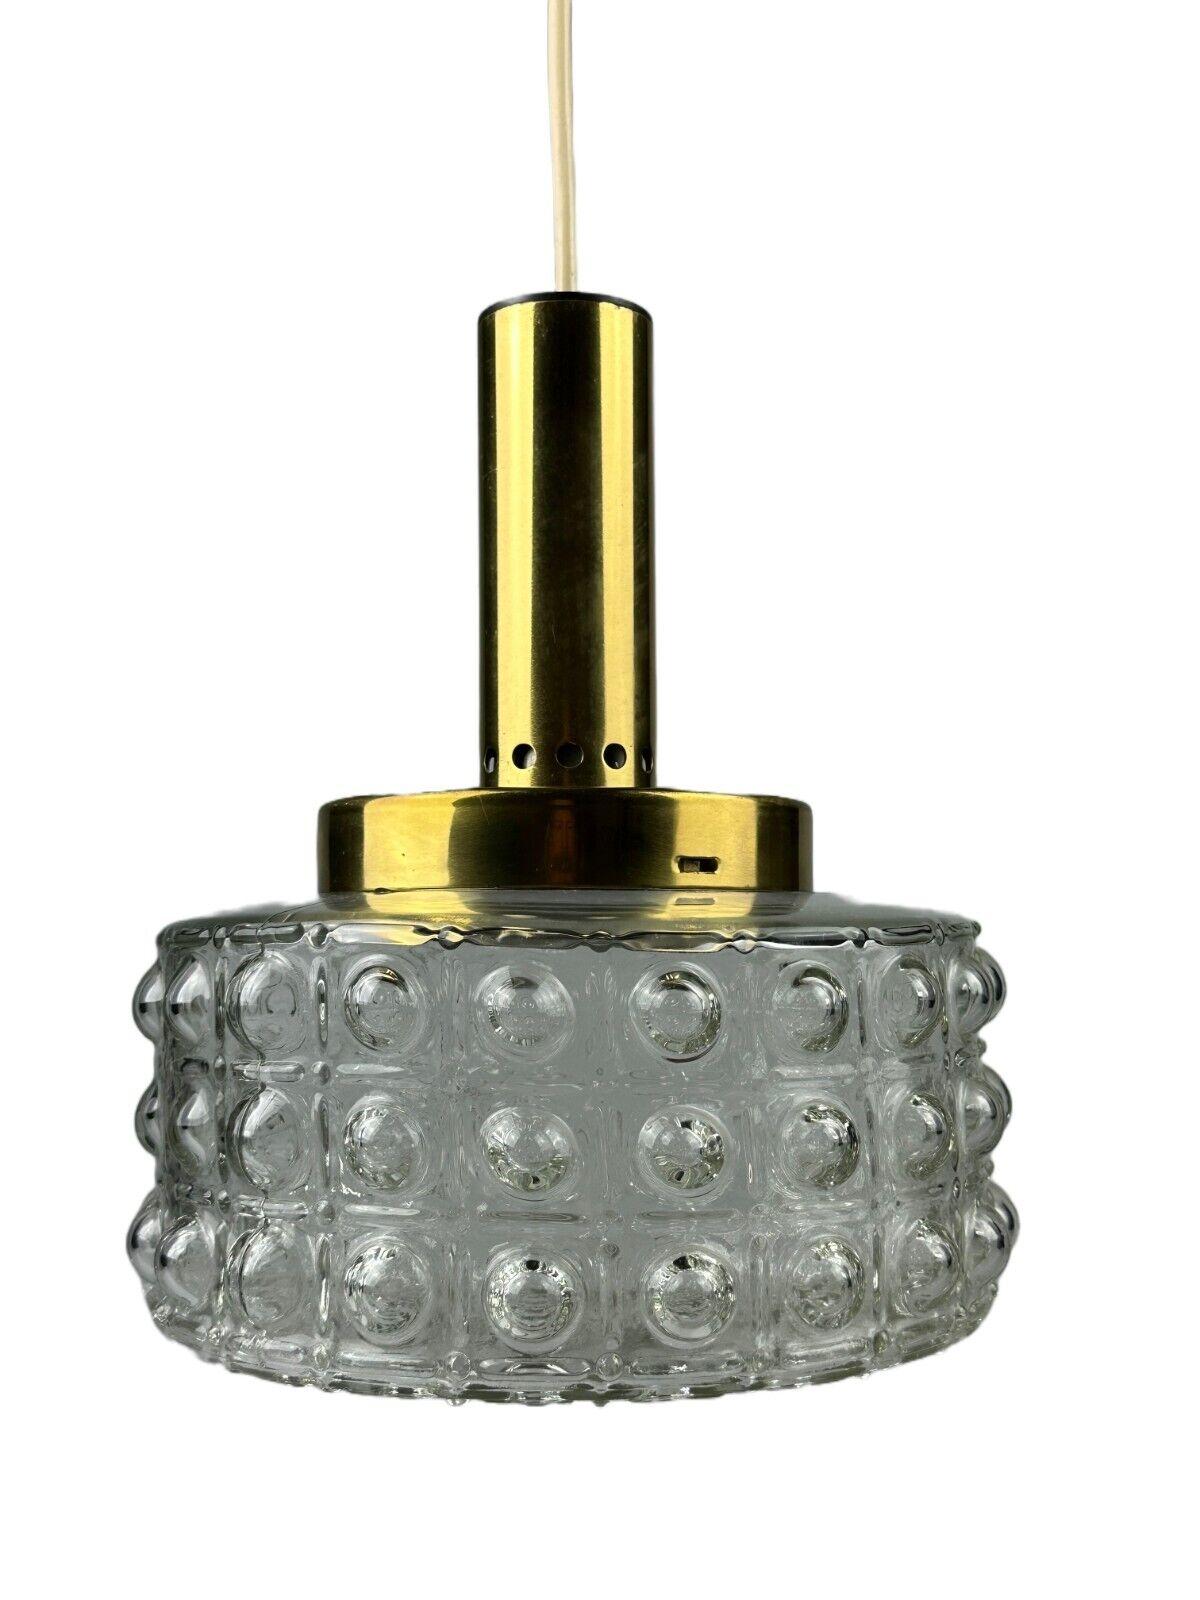 60s 70s VEB hanging lamp ceiling lamp bubble brass glass space age design

Object: ceiling lamp

Manufacturer: VEB

Condition: good

Age: around 1960-1970

Dimensions:

Diameter = 23cm
Height = 27.5cm

Other notes:

E27 socket

The pictures serve as